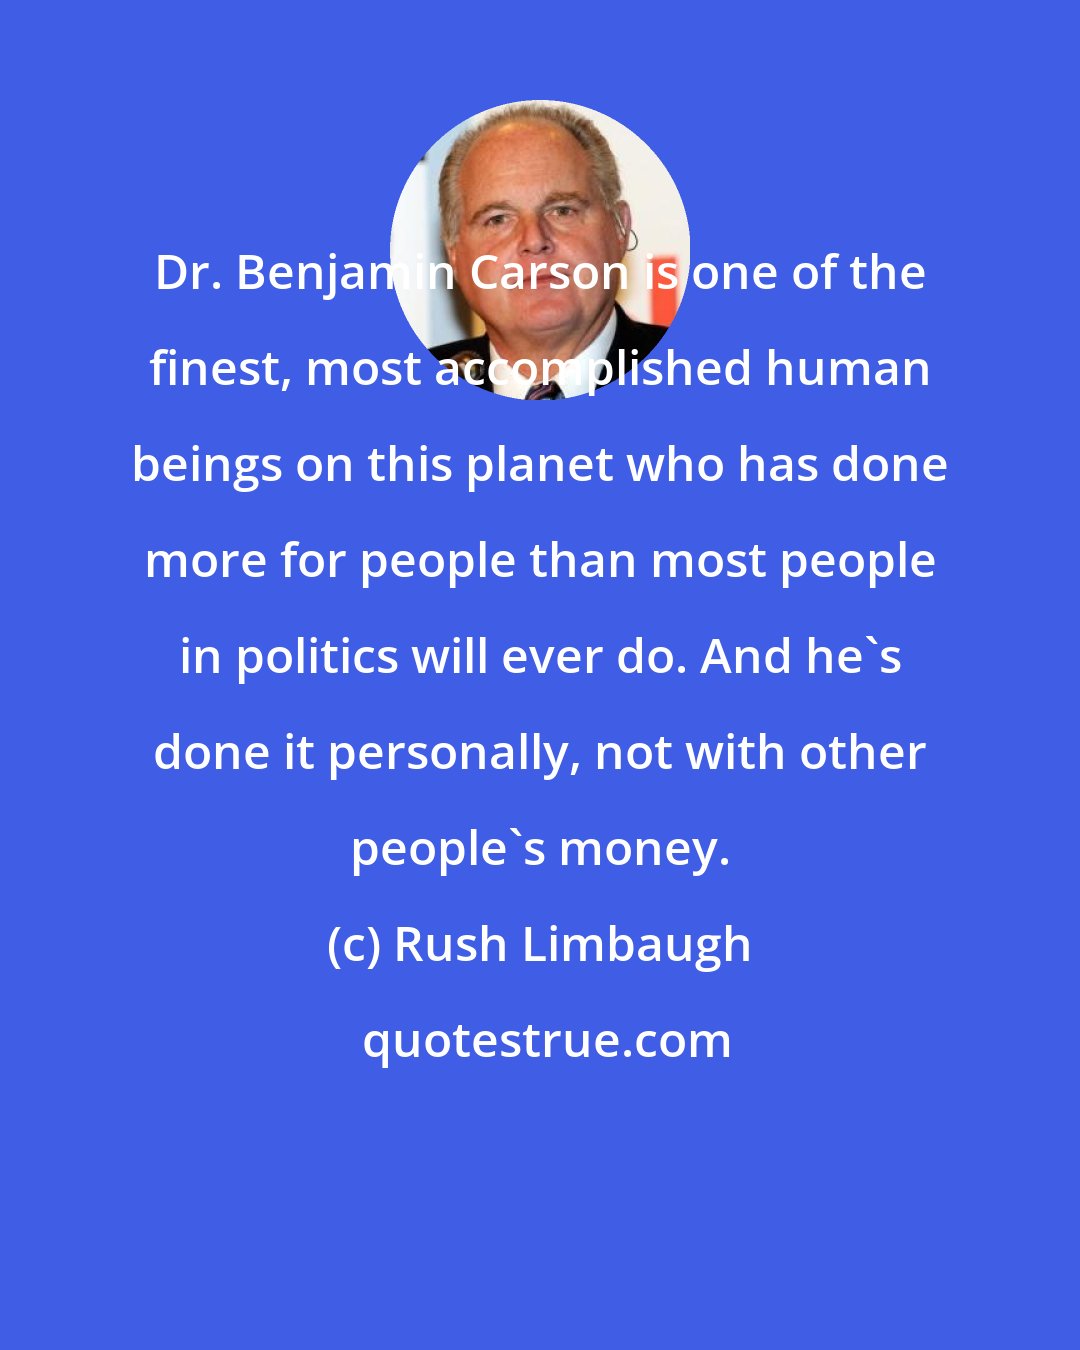 Rush Limbaugh: Dr. Benjamin Carson is one of the finest, most accomplished human beings on this planet who has done more for people than most people in politics will ever do. And he's done it personally, not with other people's money.